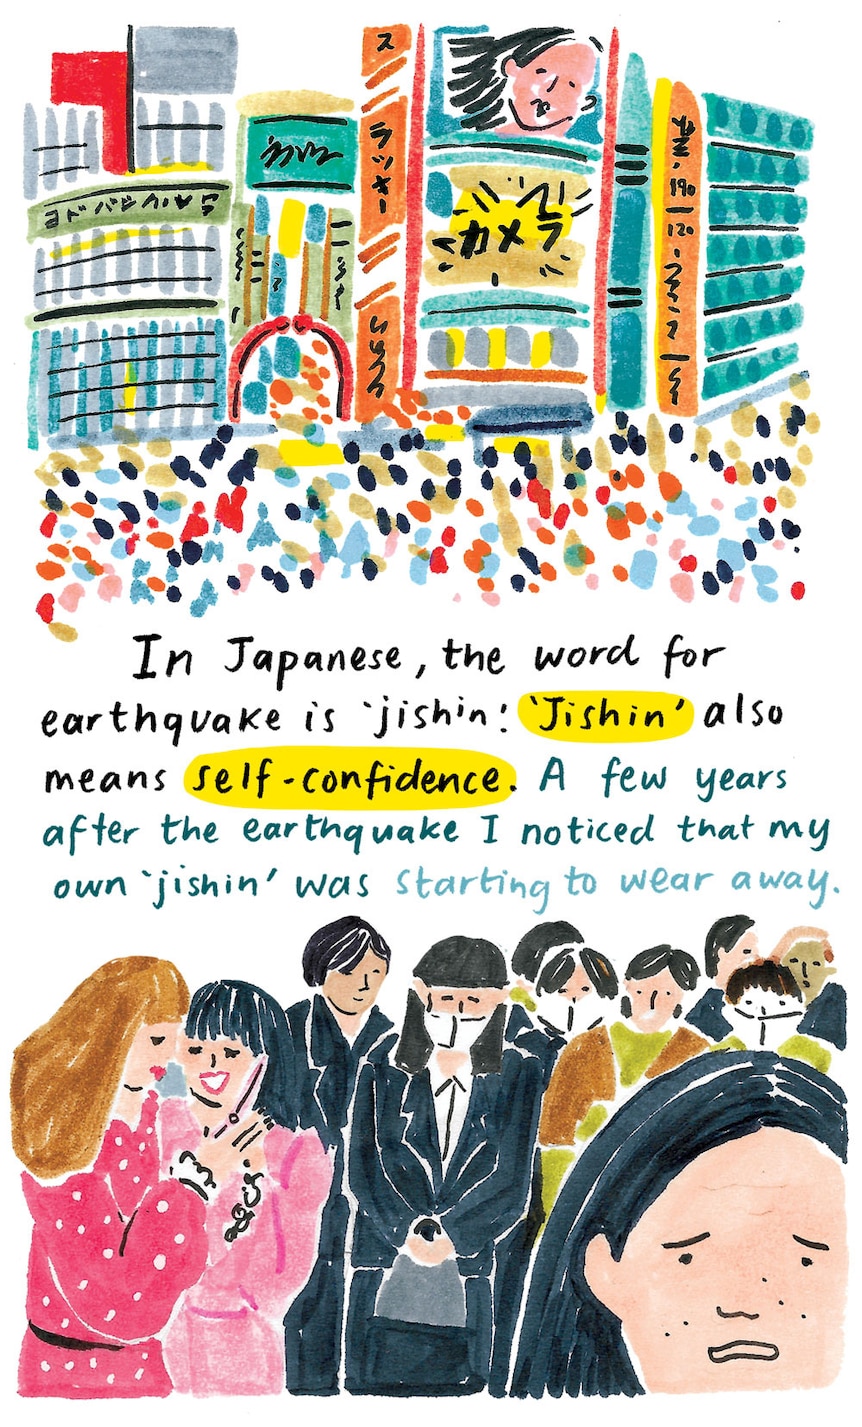 "The word for earthquake is 'jishin' which also means self-confidence. After the earthquake I noticed my jishin wearing away."